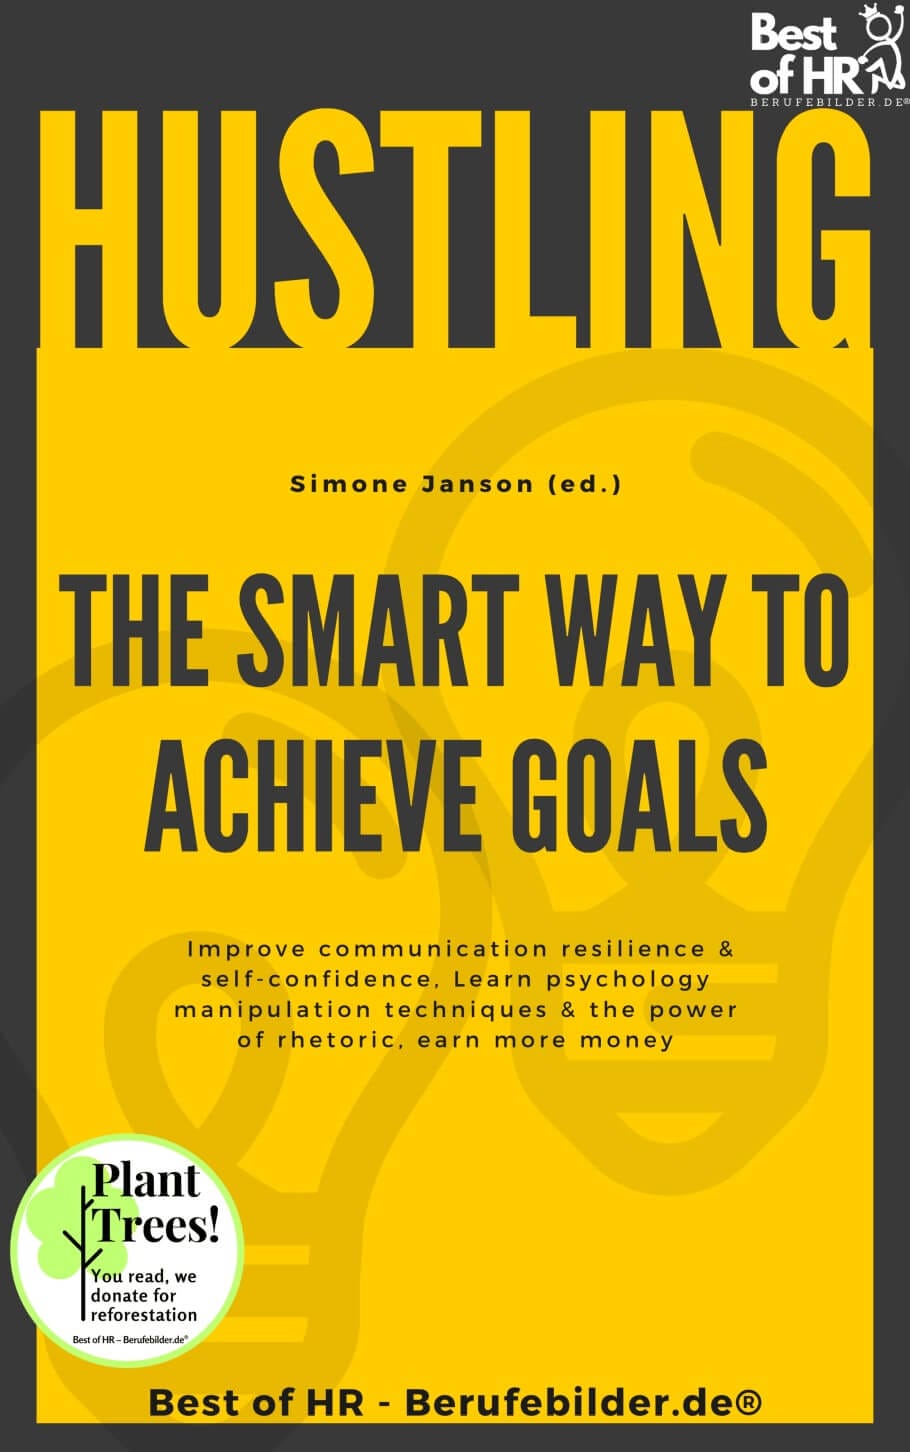 Hustling – The Smart Way to Achieve Goals (Engl. Version)